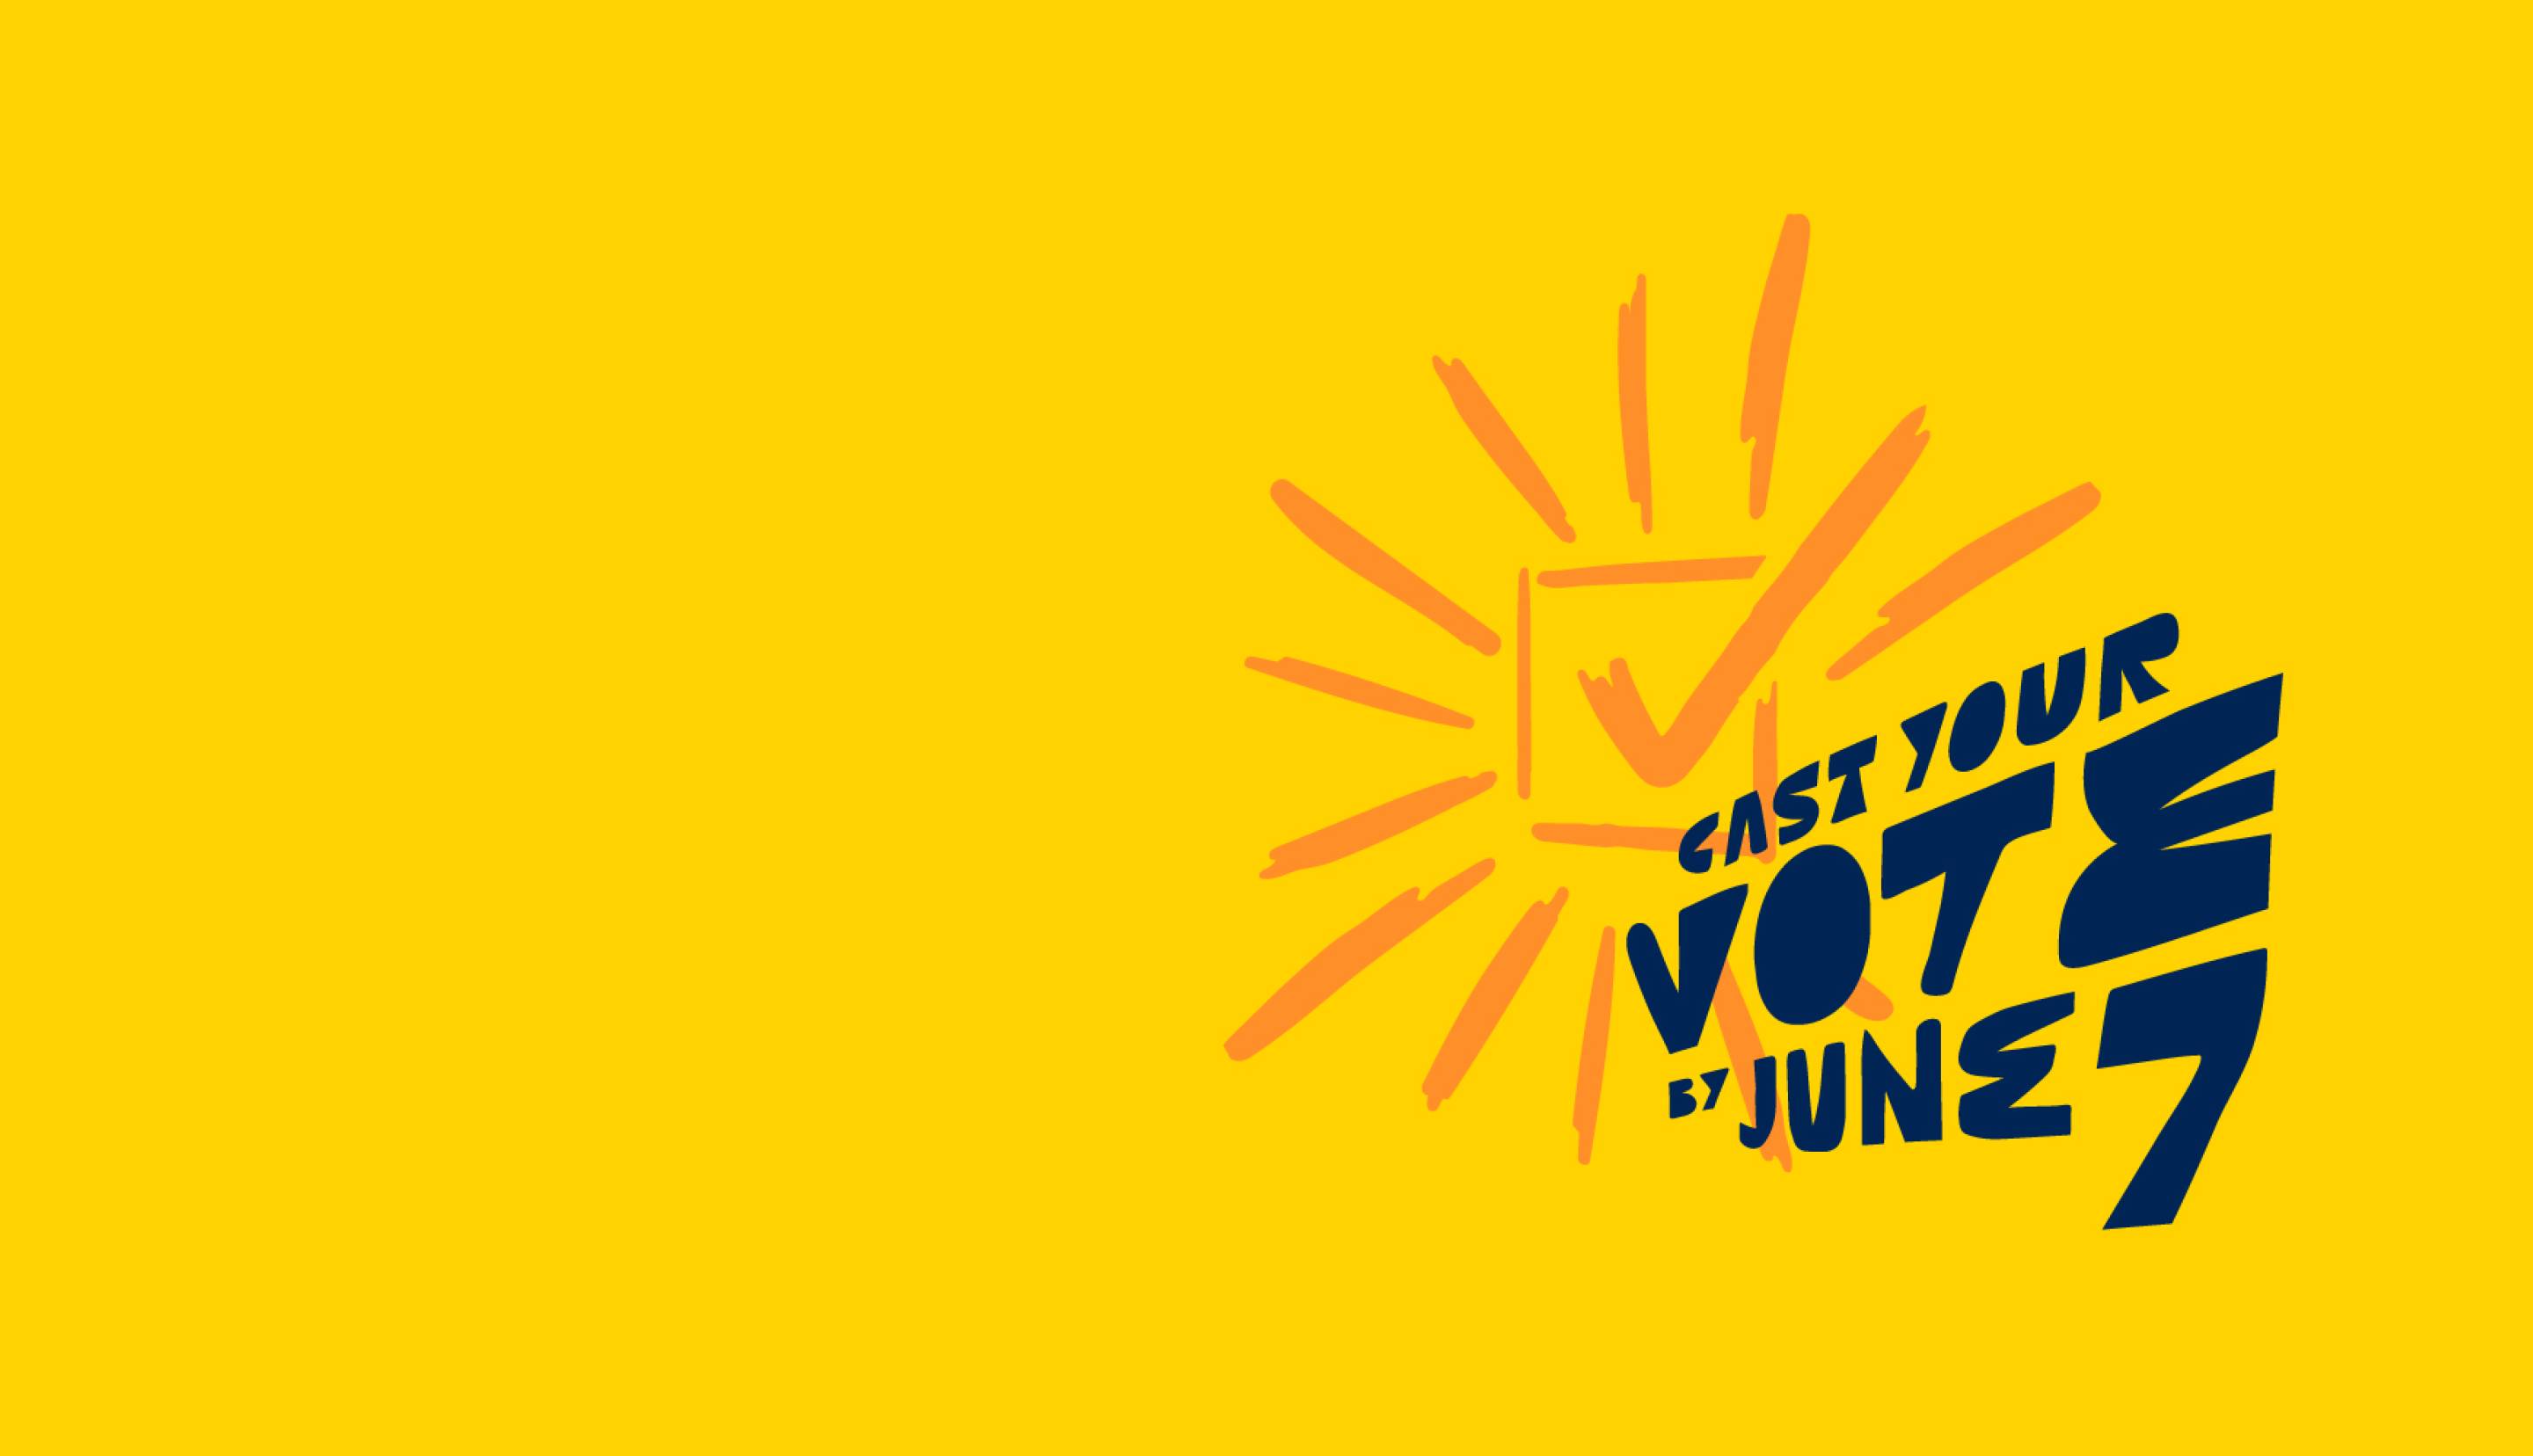 Illustration of a check box checked with the words "Case your vote on June 7"